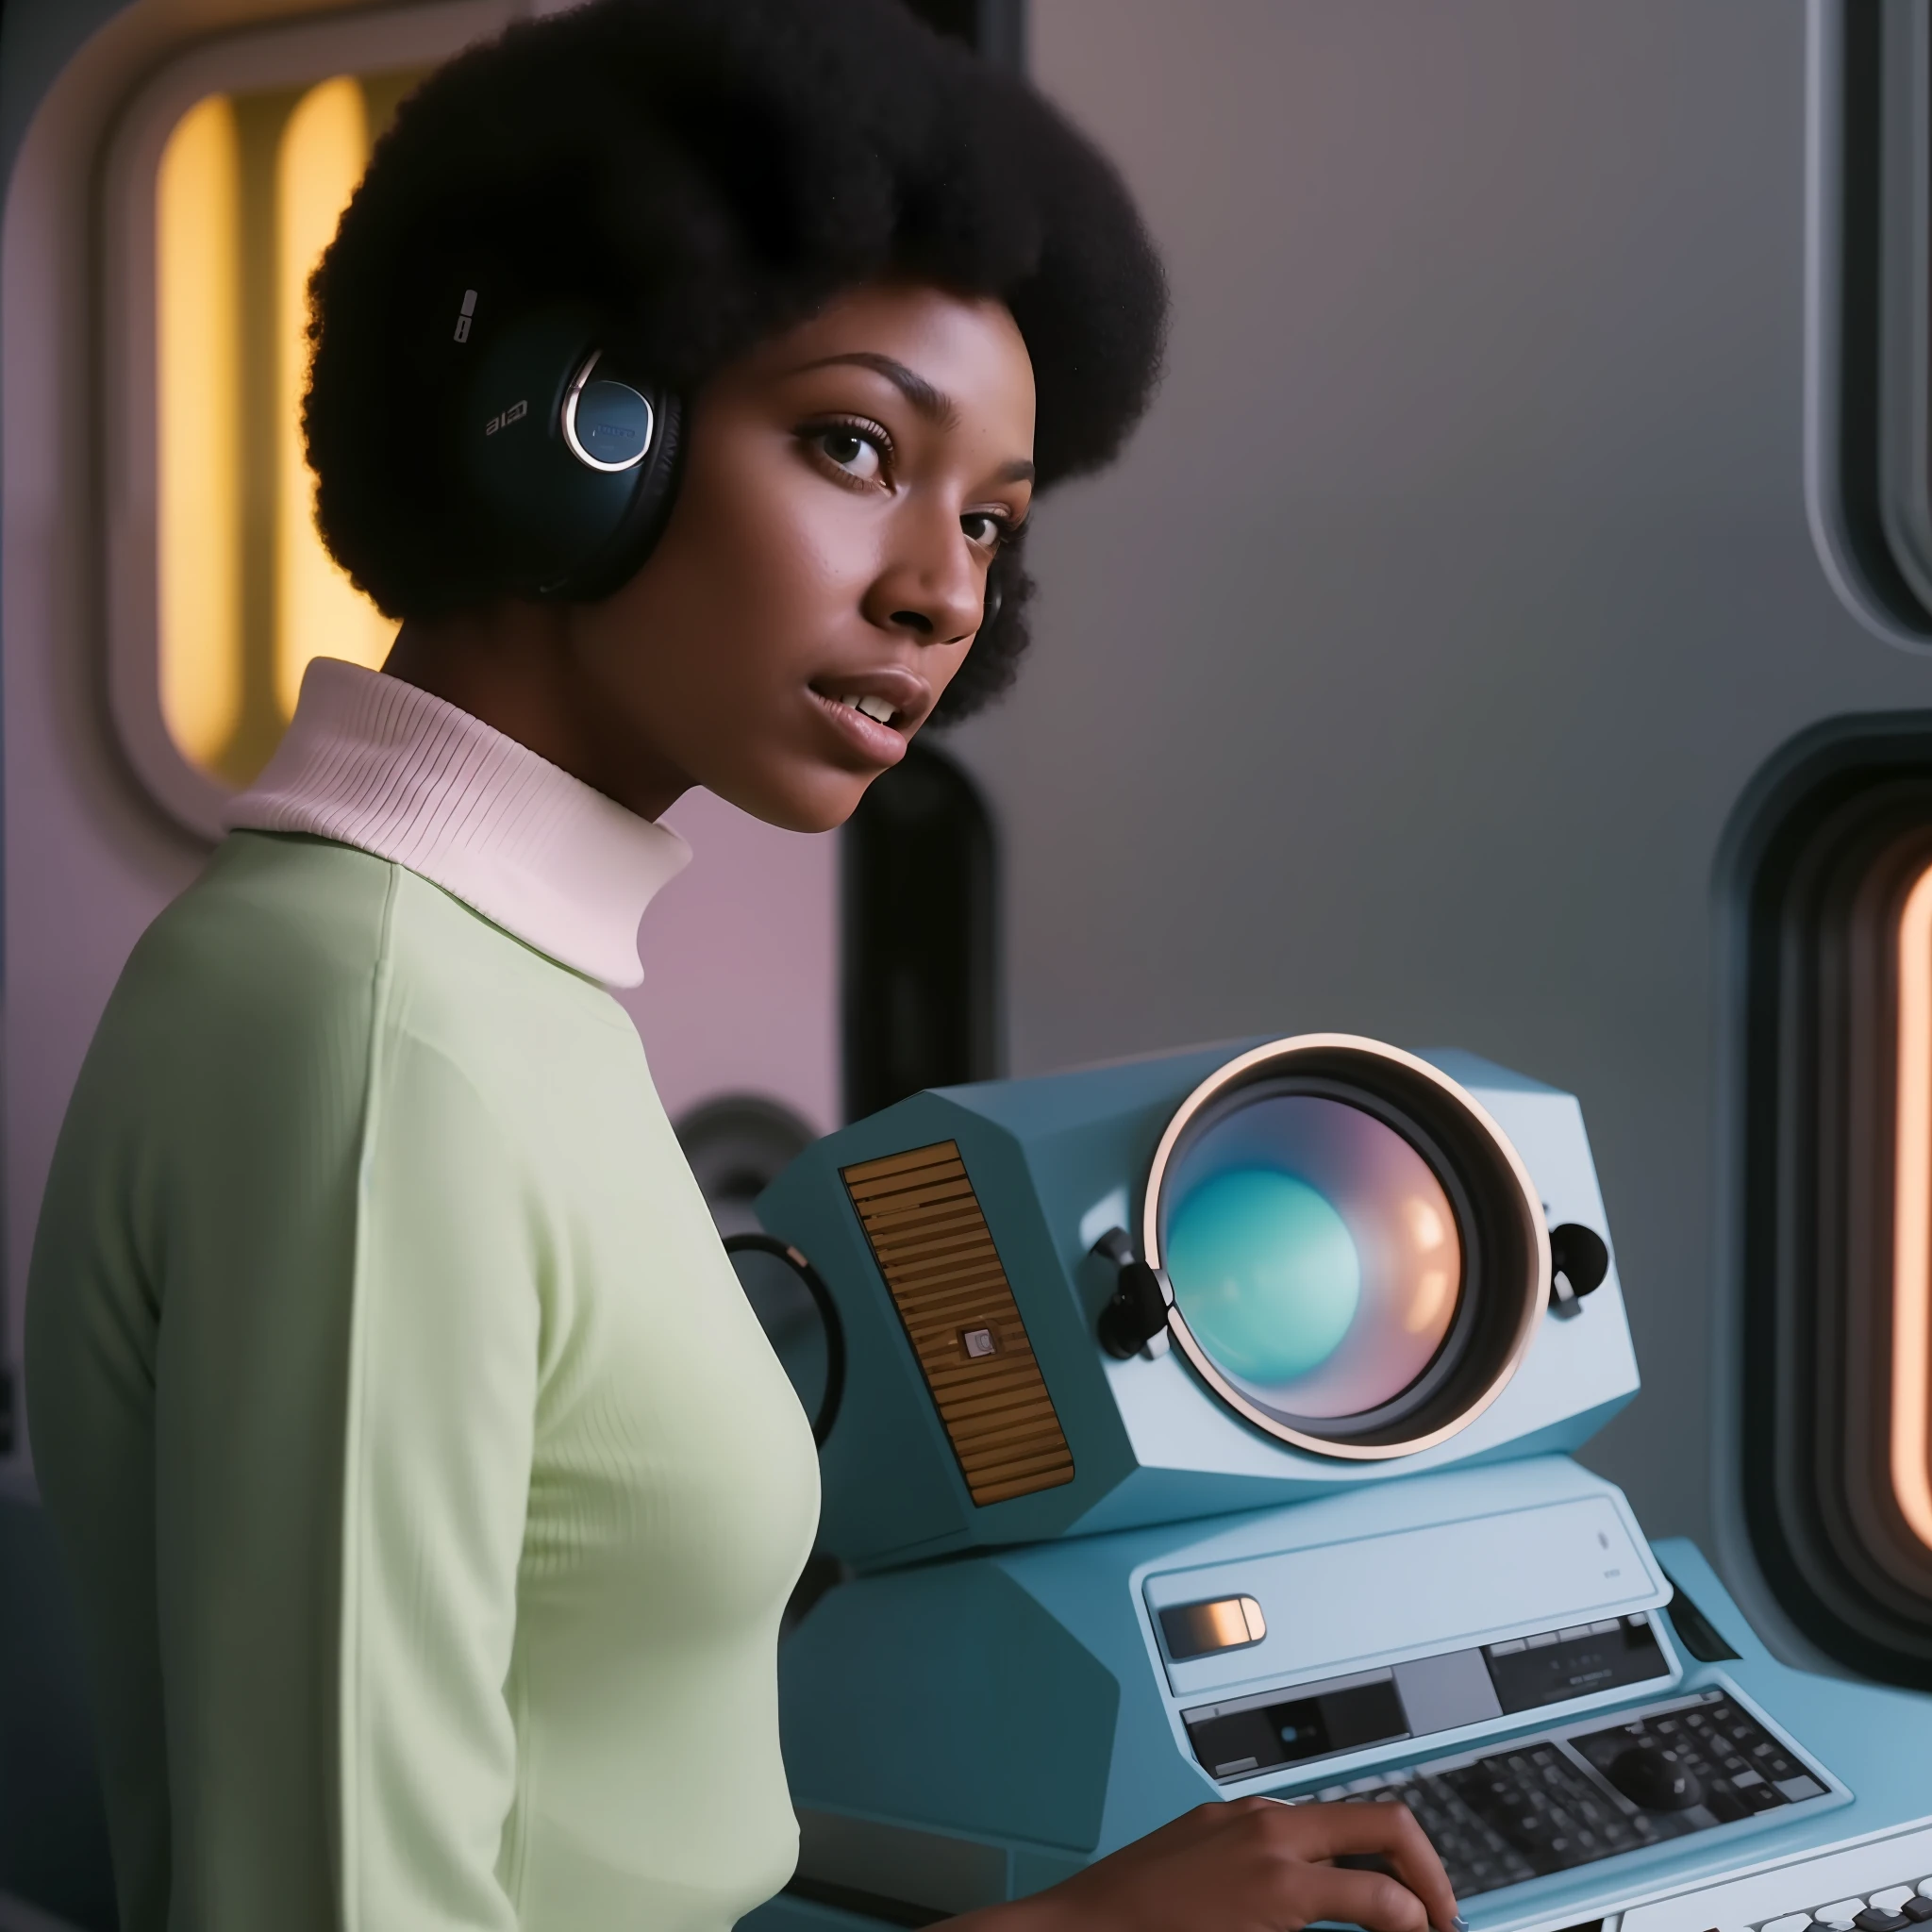 Woman in green sweater and headphones stands in front of a computer, 7 0's vintage sci - estilo fi, afro - estilo futurista, Afrofuturista, futurismo afro, Retro Sci - Imagem de FI, afrofuturista, afrofuturismo, afro futurista, 1 9 6 0 s  espacial, estilo afrofuturismoo, No filme 2001 Uma Spaceodyssey